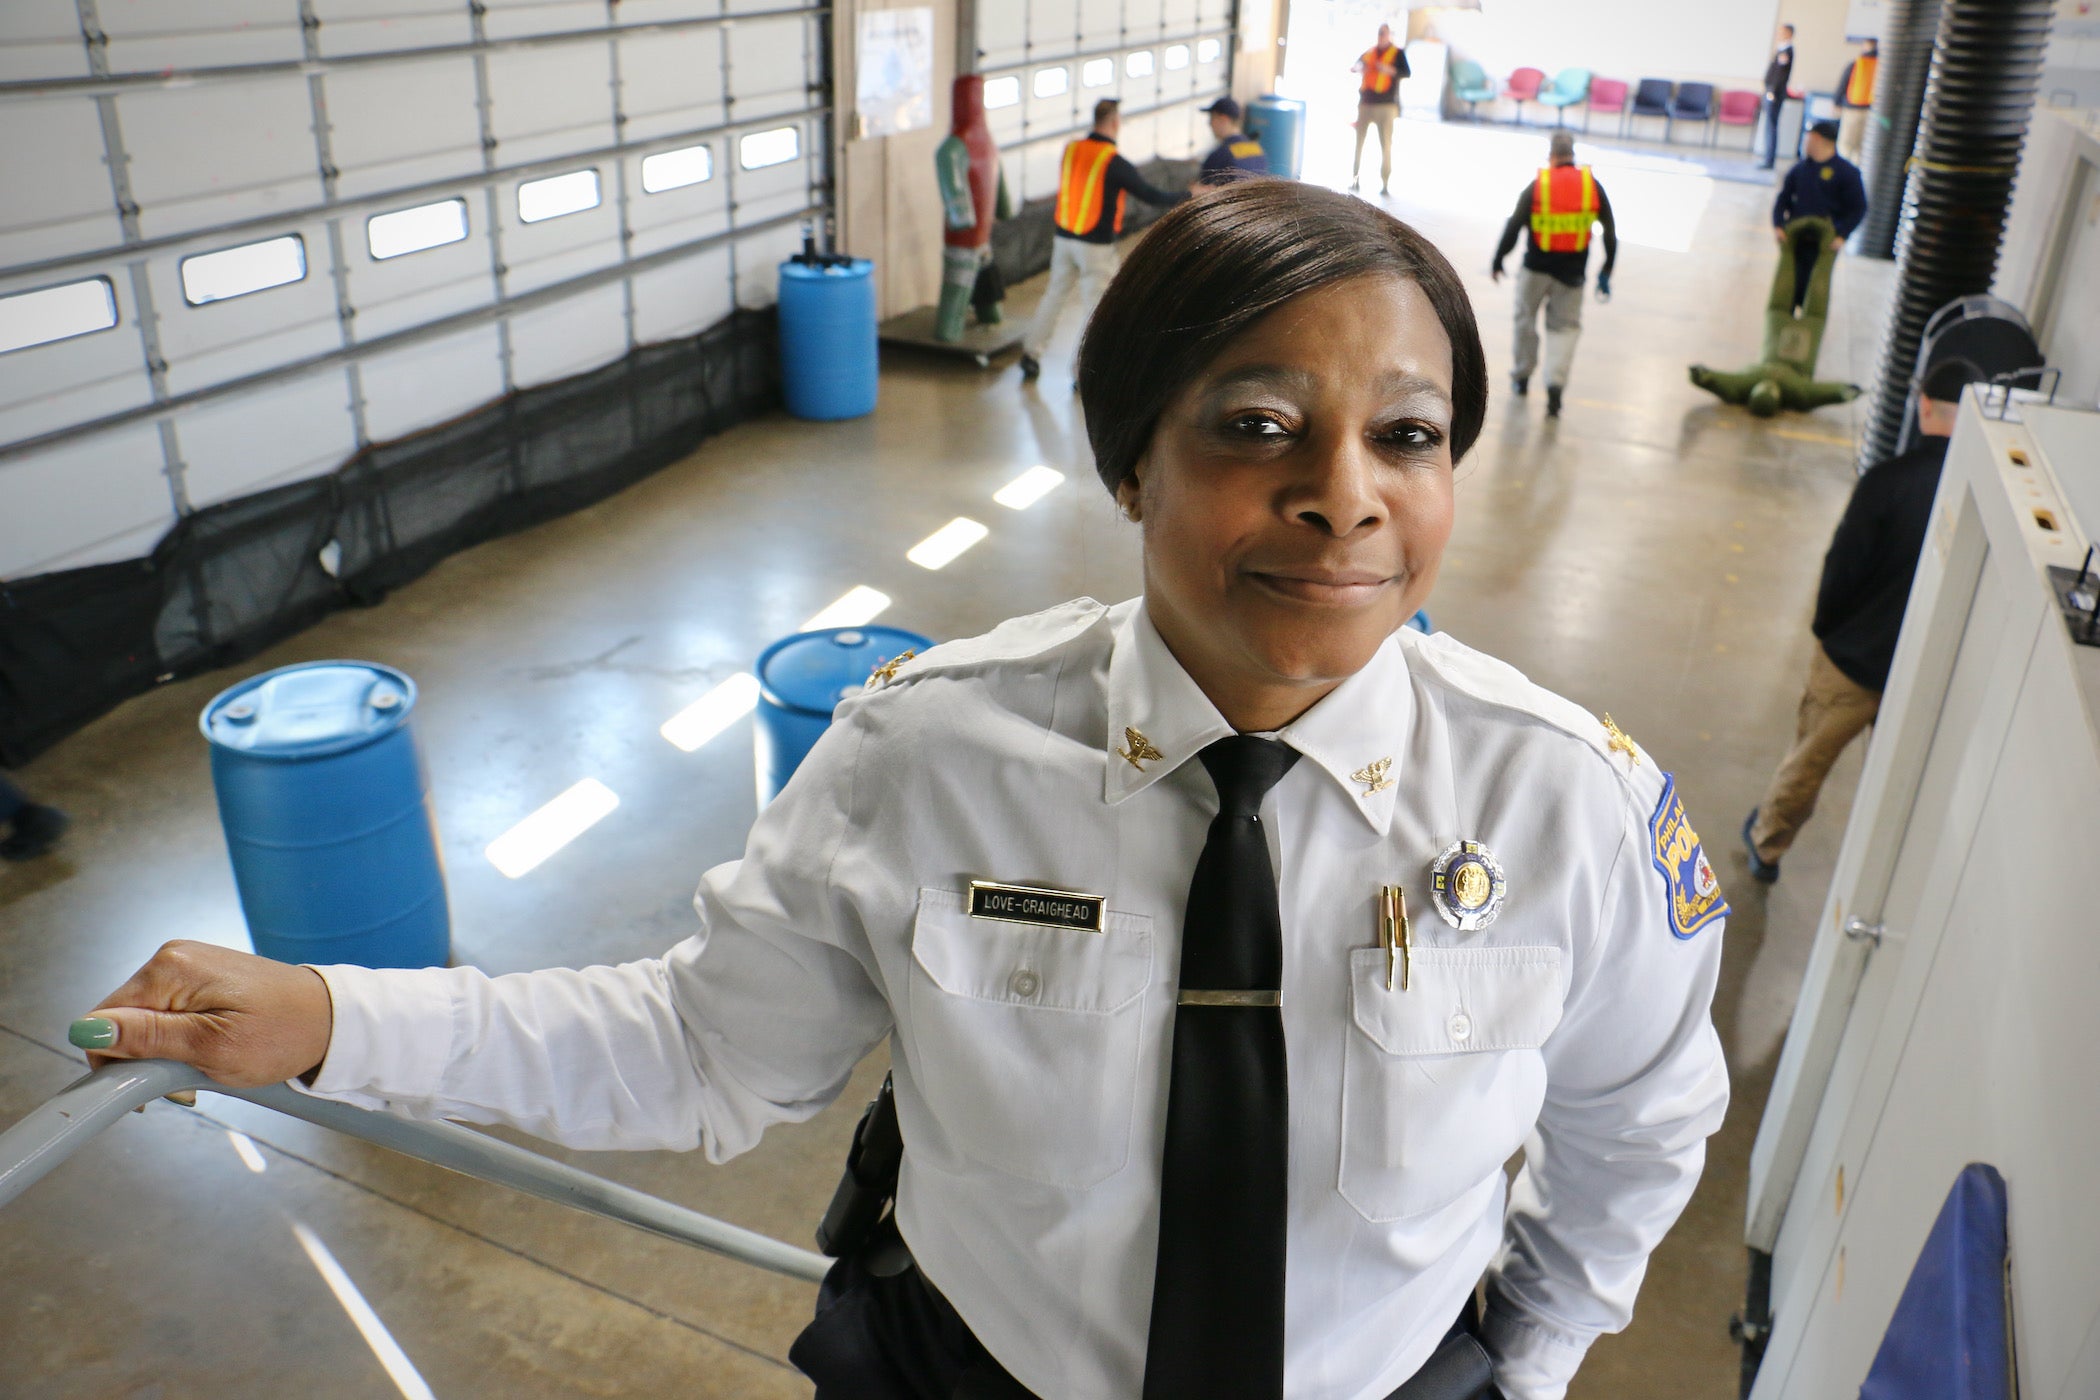 Altovise Love-Craighead smiles, paused on a staircase. Below her is a large space where police recruits are training.